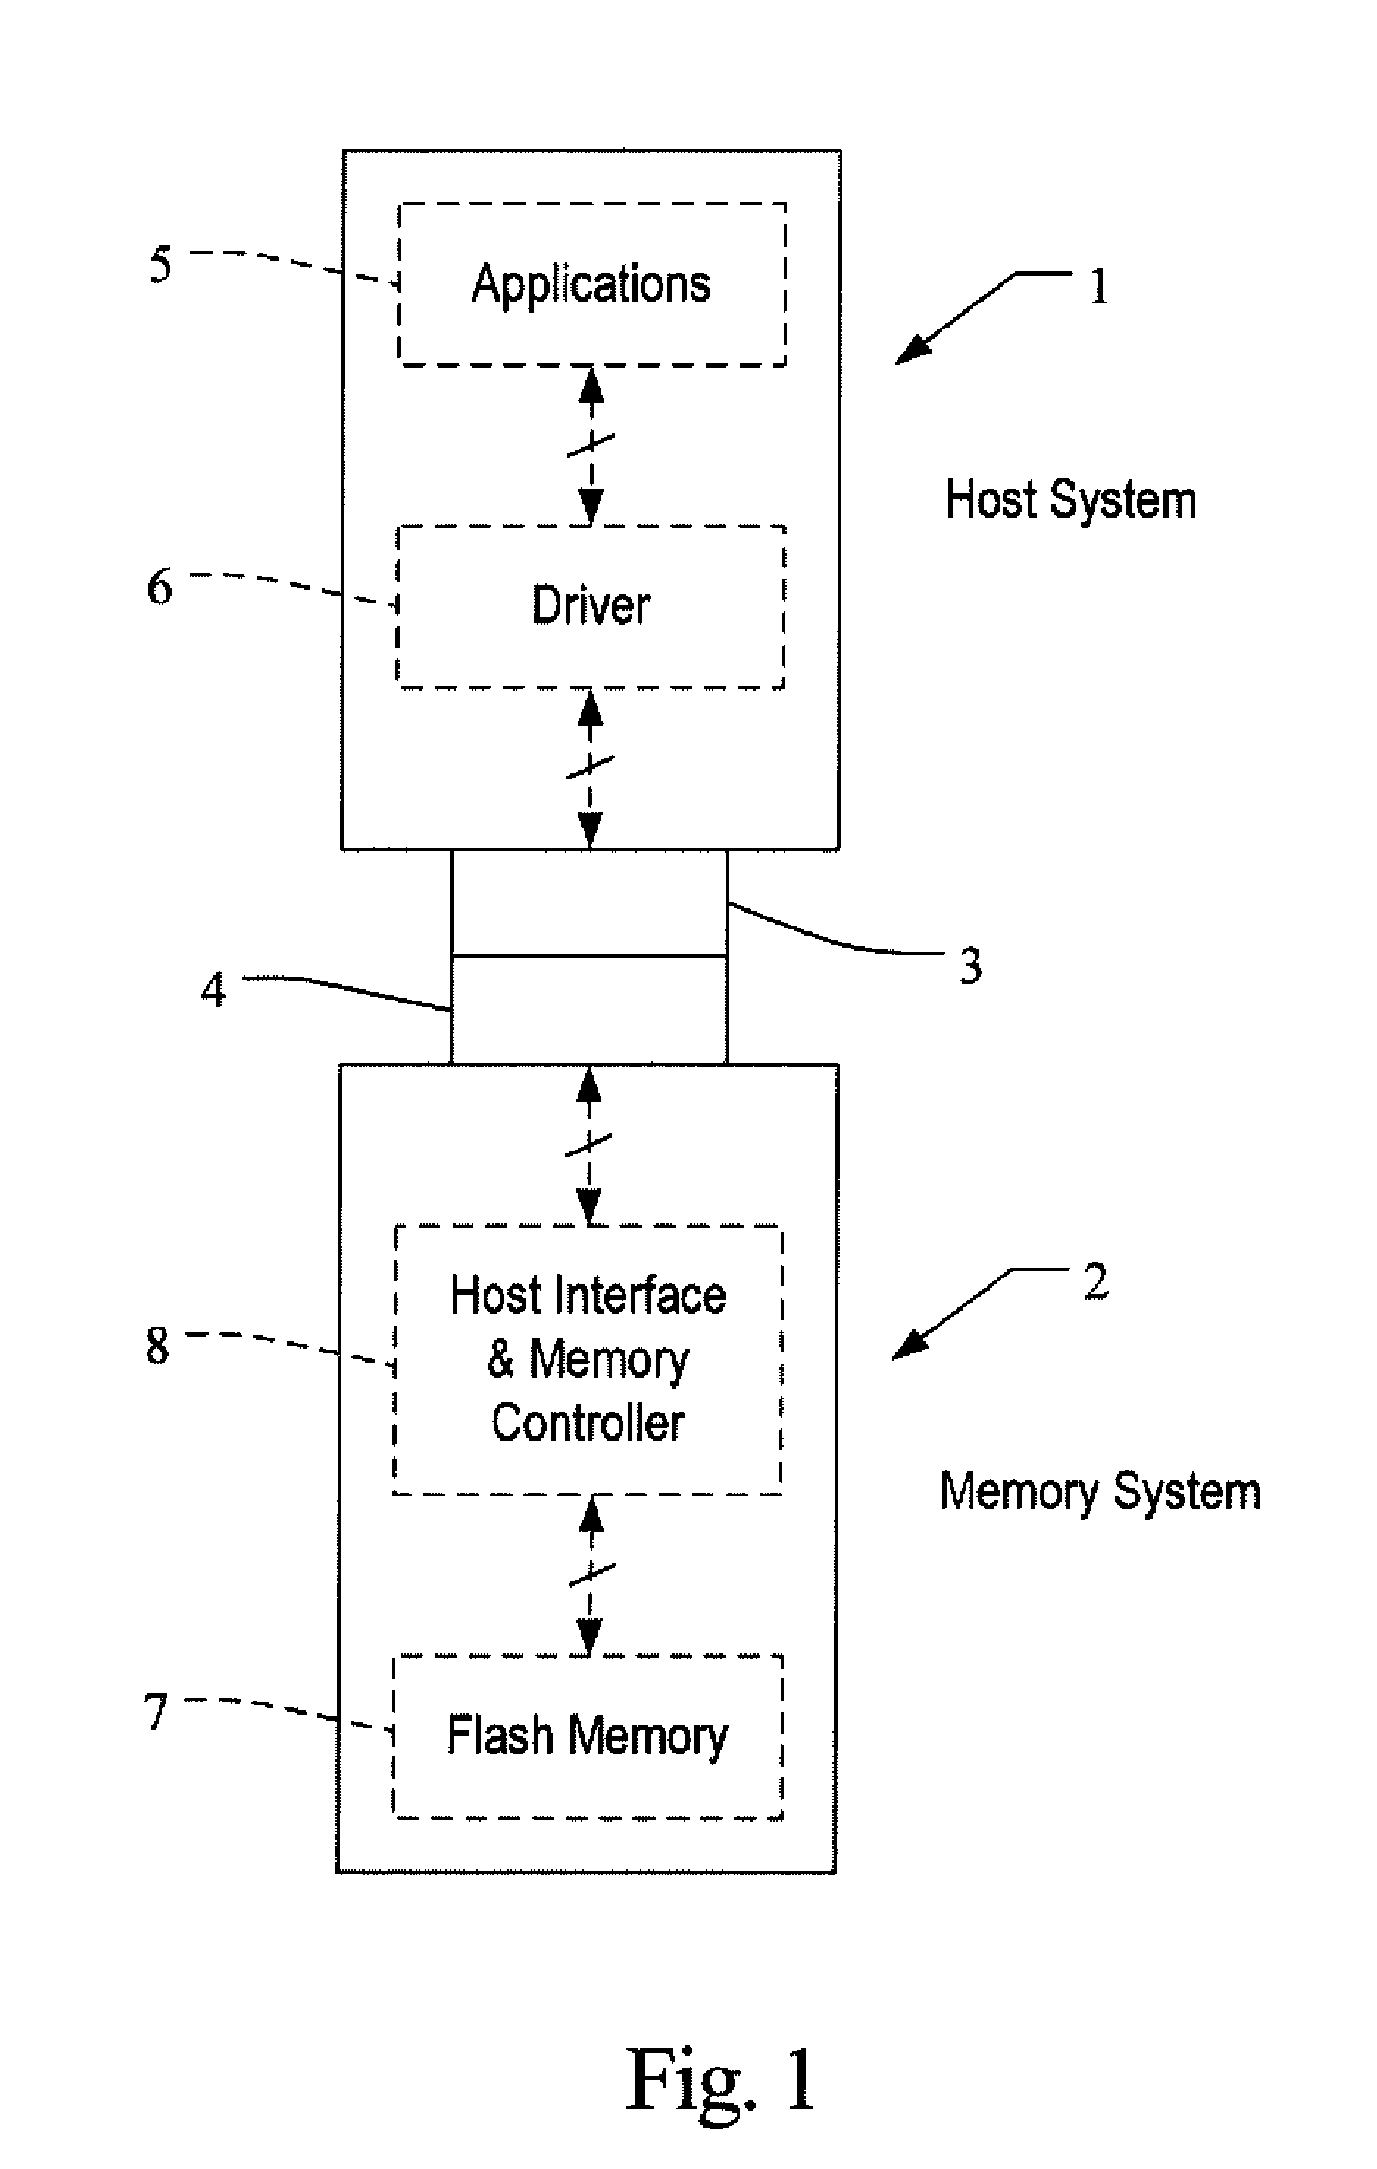 System and Method for Implementing Extensions to Intelligently Manage Resources of a Mass Storage System